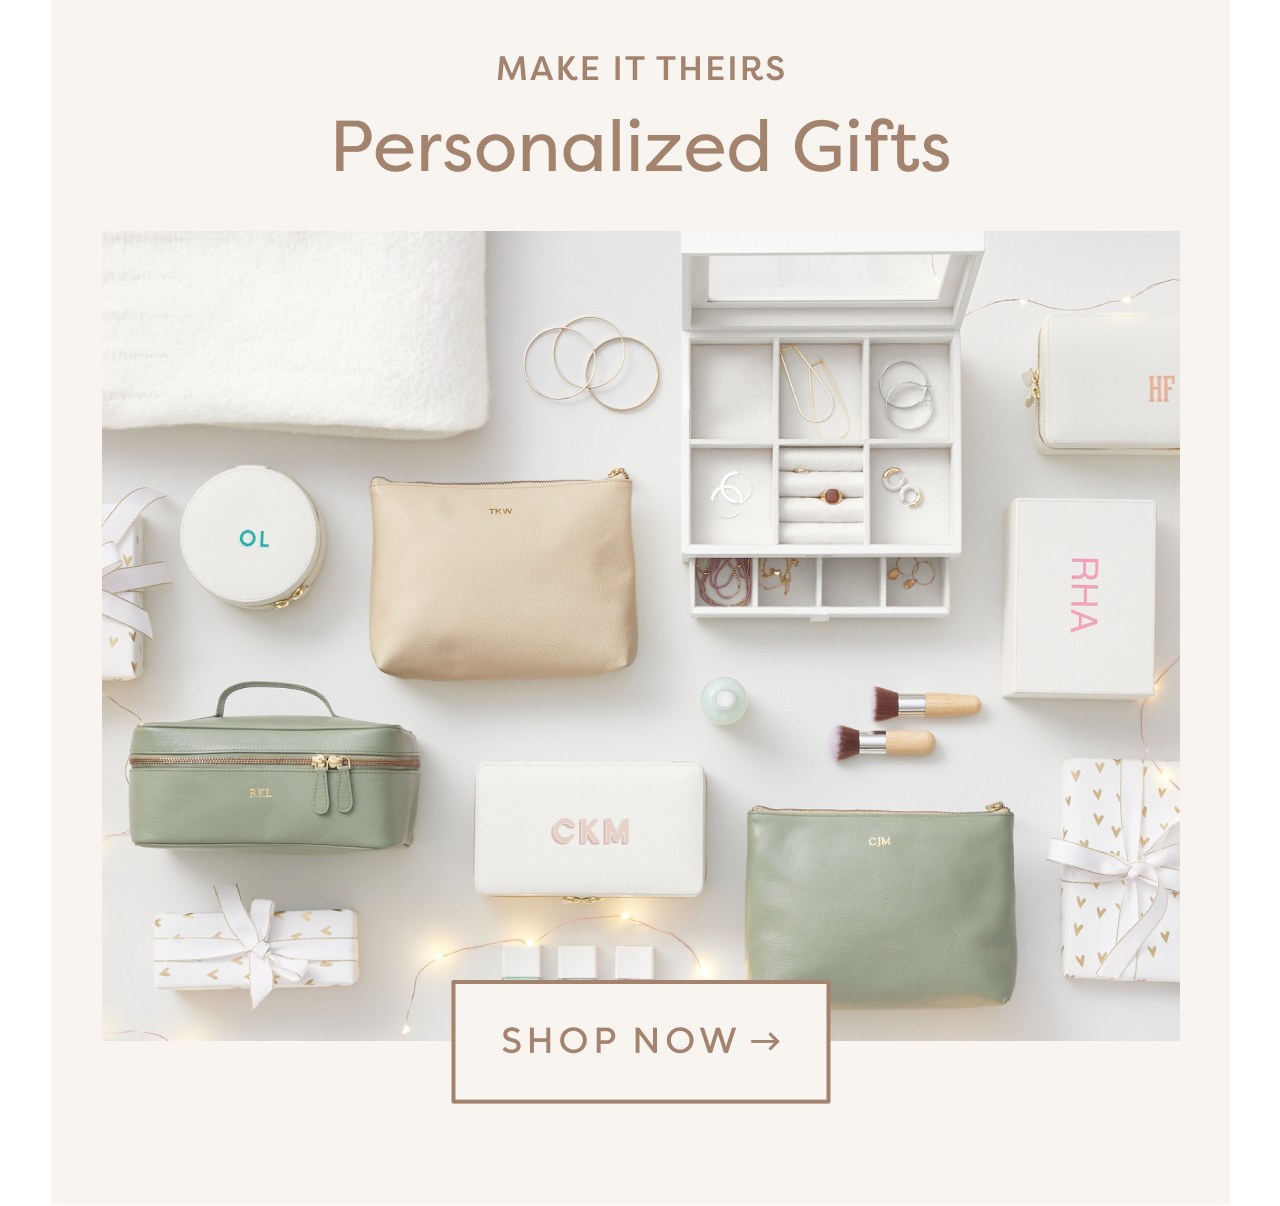 MAKE IT THEIRS. PERSONALIZED GIFTS. SHOP NOW